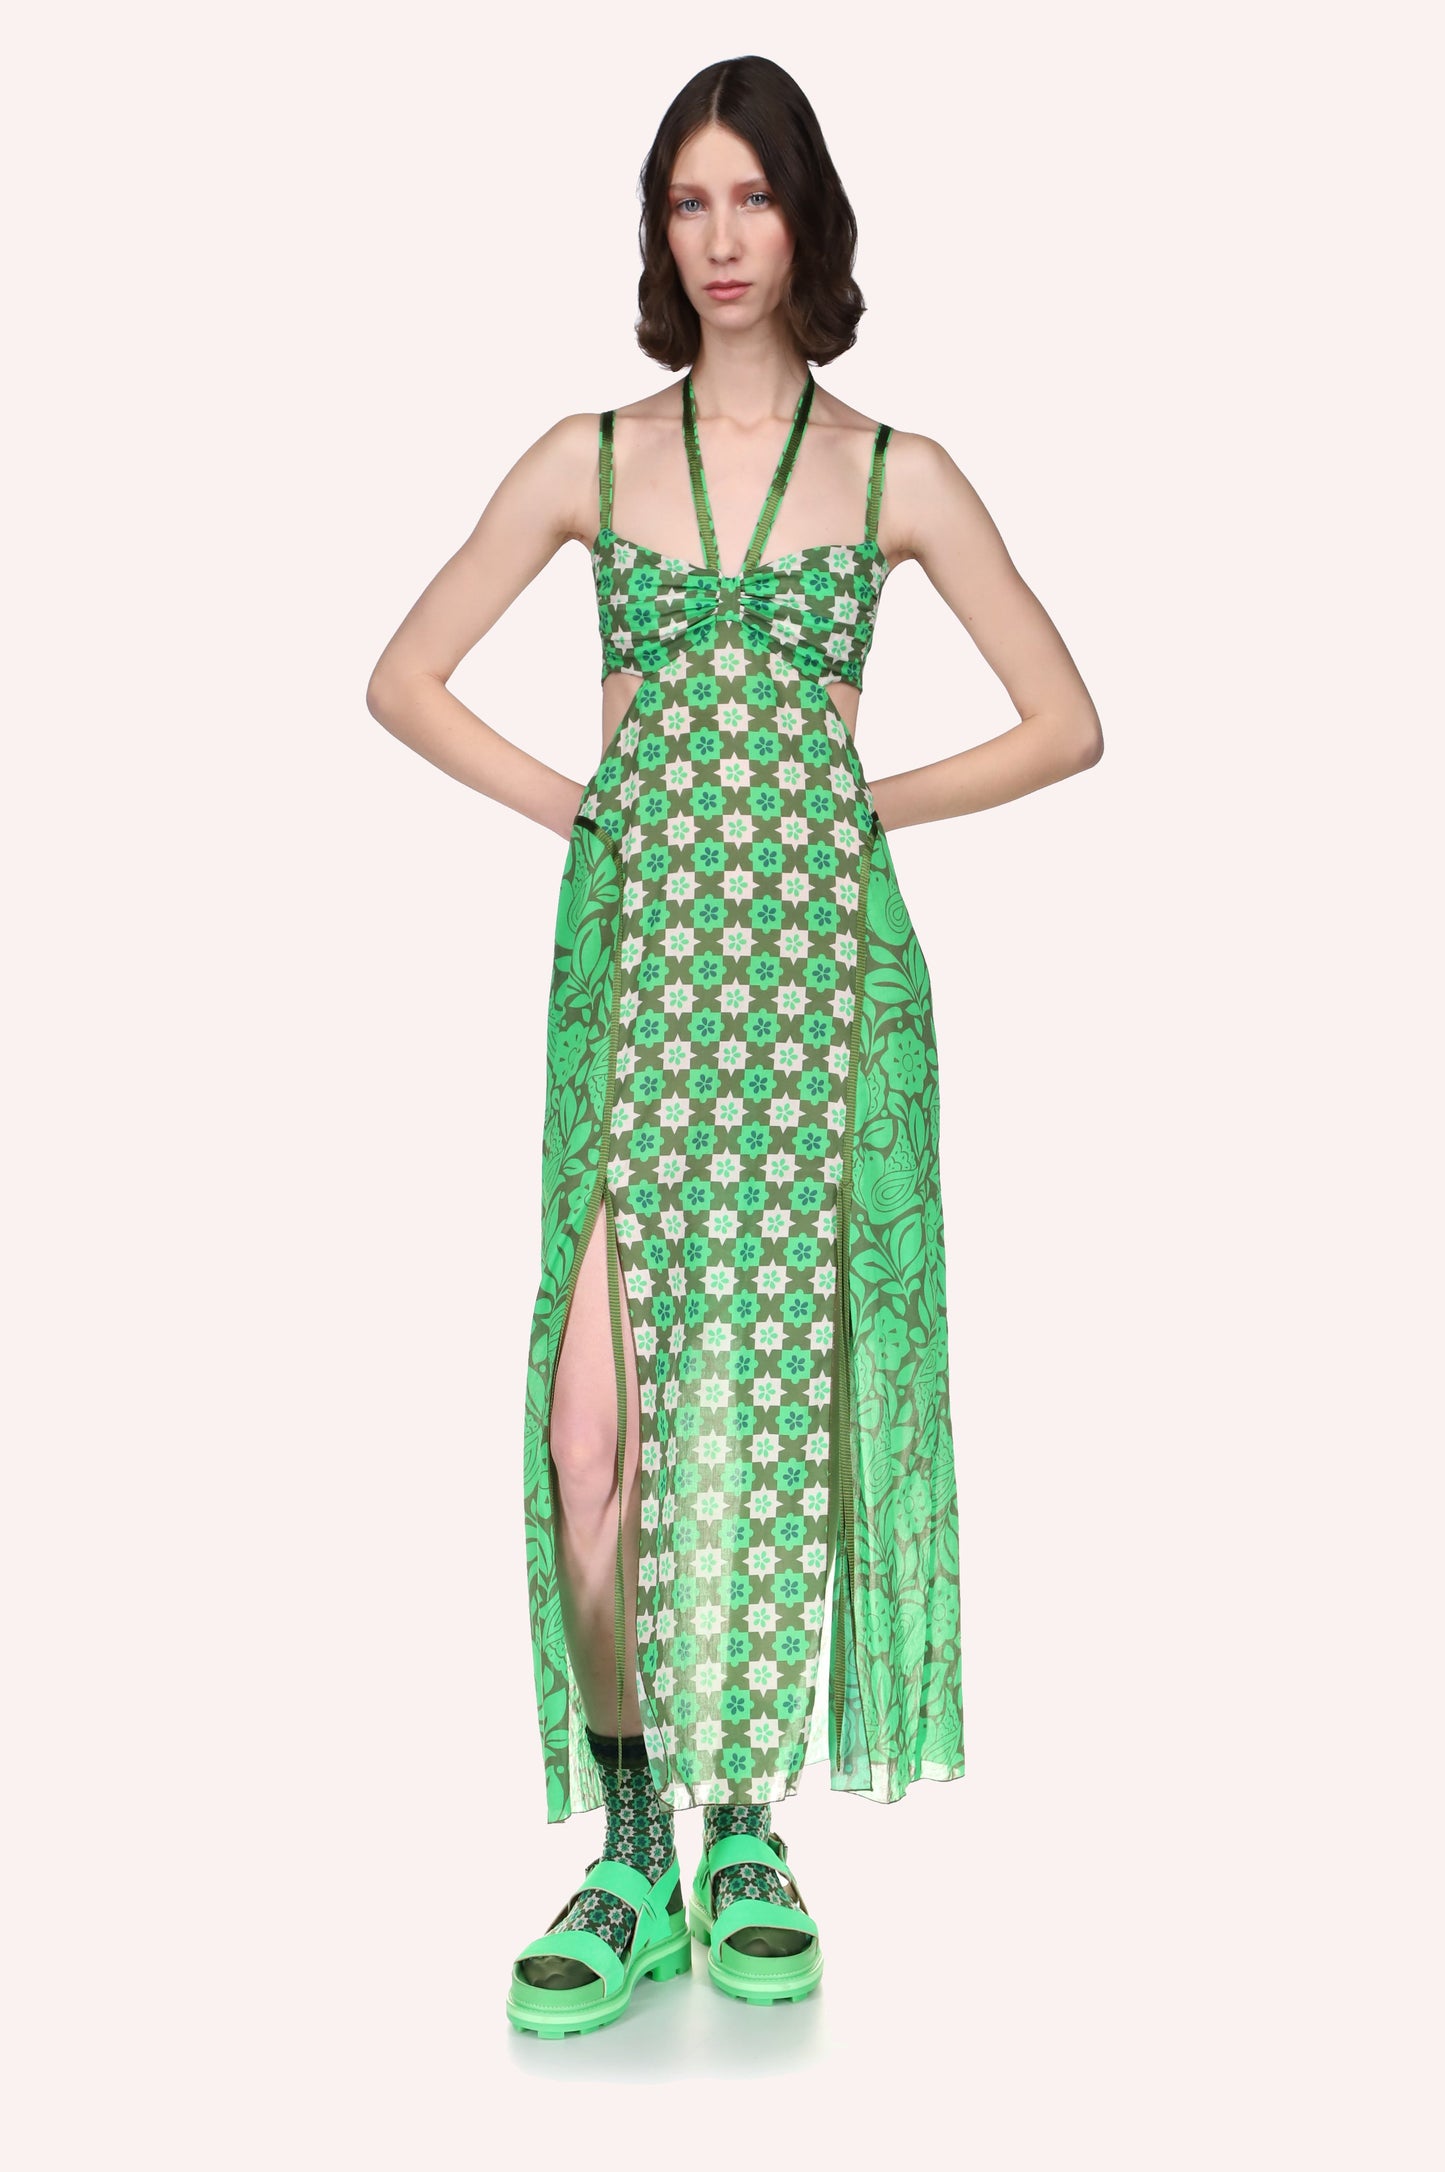 Bird of Paradise strappy green dress, sleeveless, 4-straps over shoulders, 2 goes around the neck